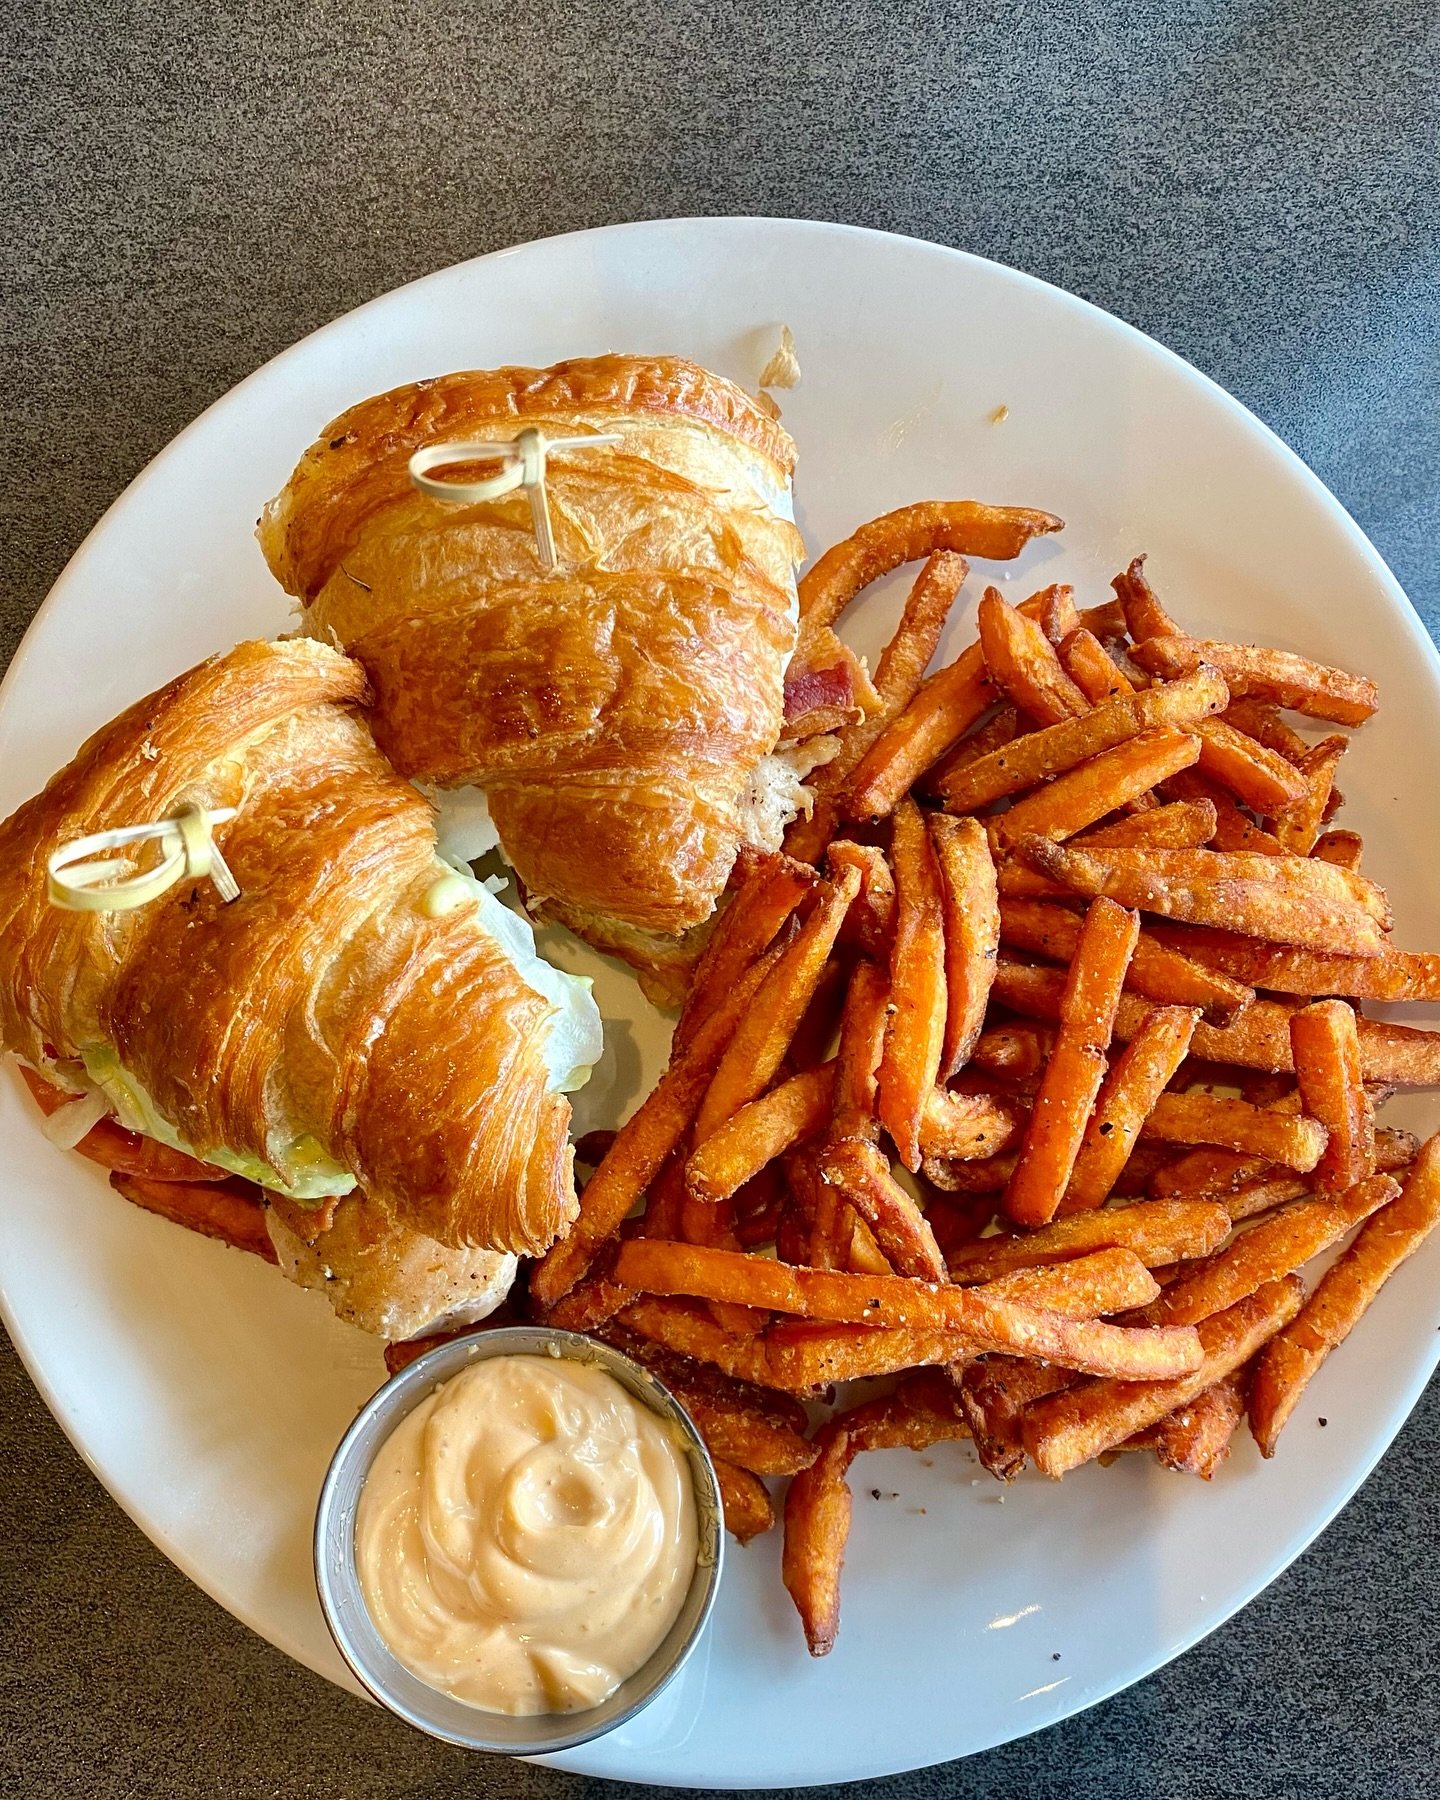 The California Club on a croissant with sweet potato fries at @sjgfreddy was very tasty. 😋 Love this dining option in Fredericton North at @westhillsgolf #maritimesmaven